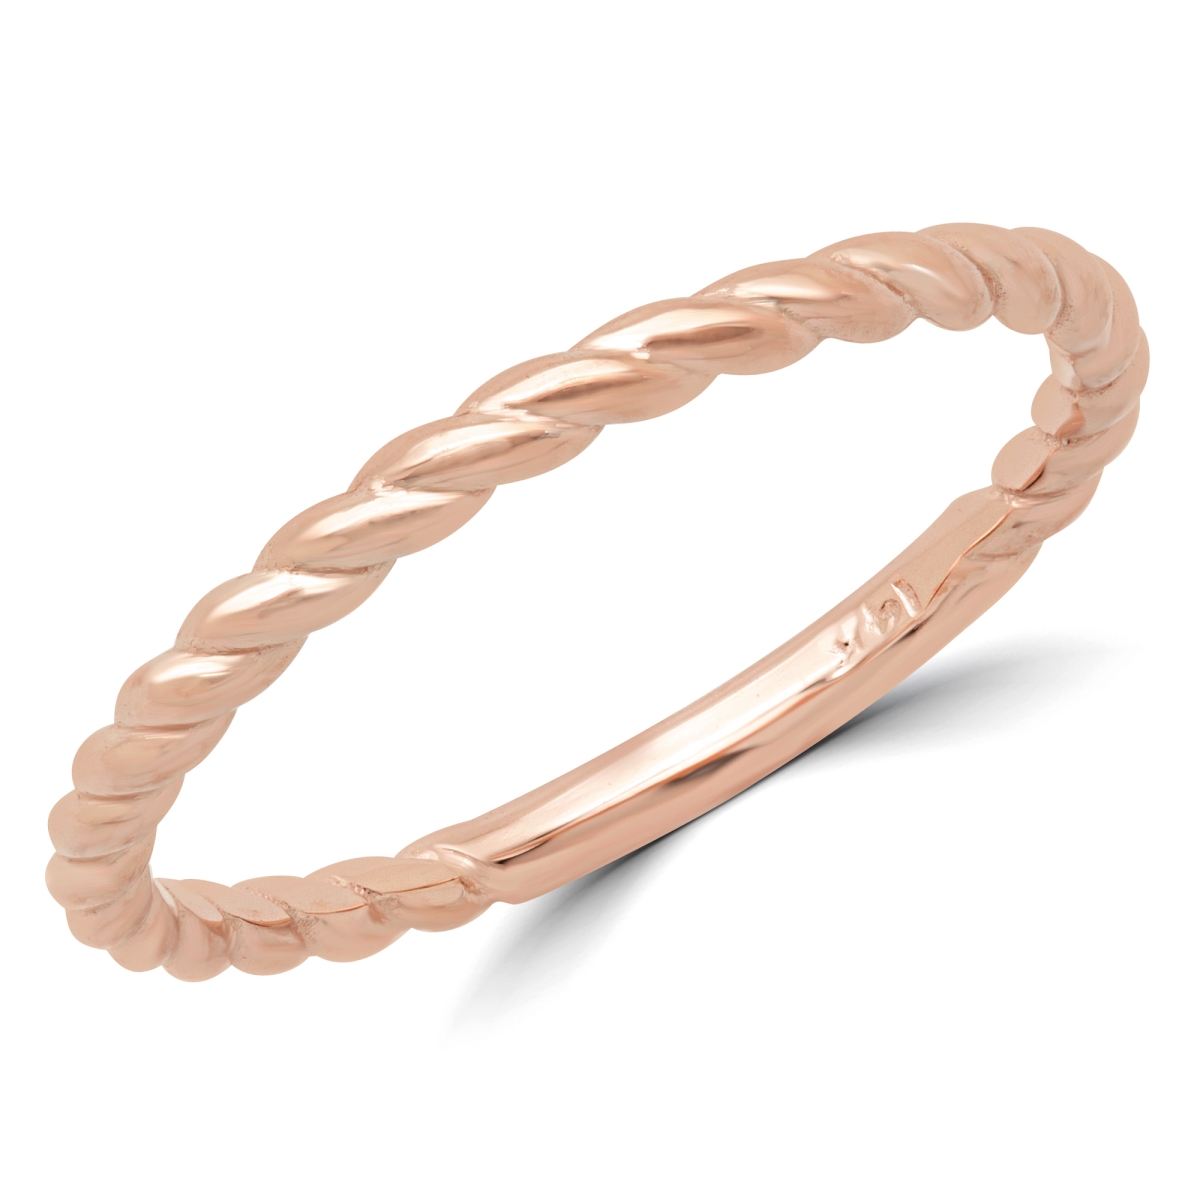 Picture of Majesty Diamonds MD180603-3.25 Braided Rope Classic Wedding Band Ring in 14K Rose Gold - Size 3.25